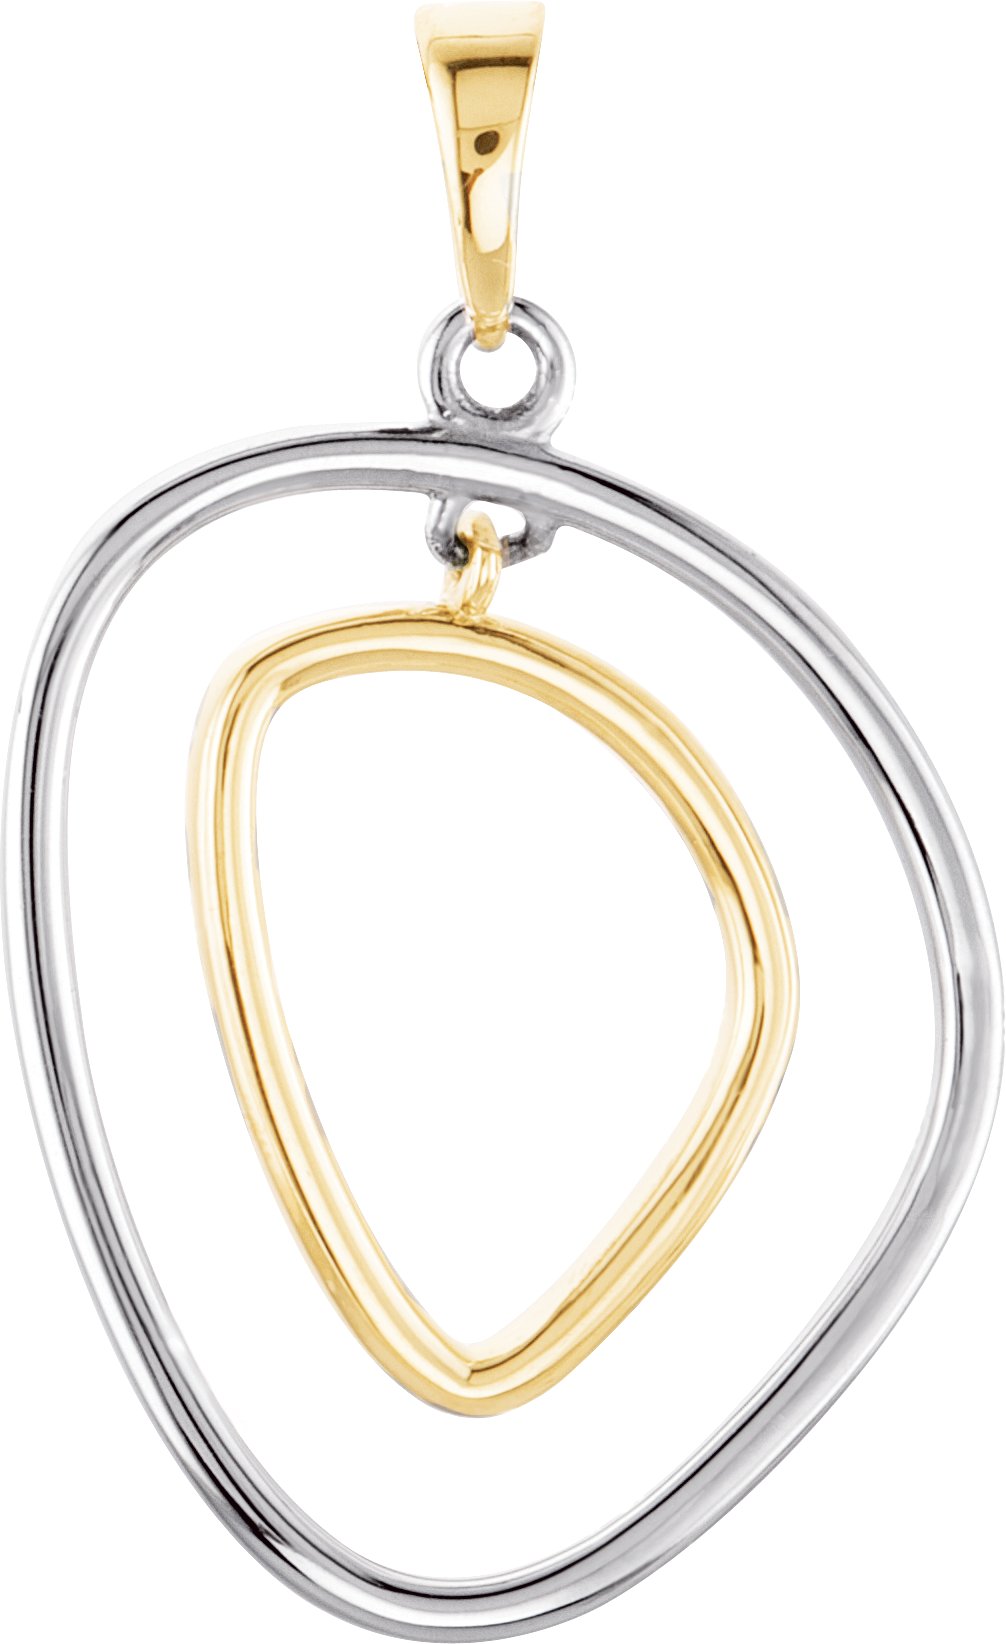 14K Yellow and Sterling Silver Open Silhouette Pendant Ref. 3418148